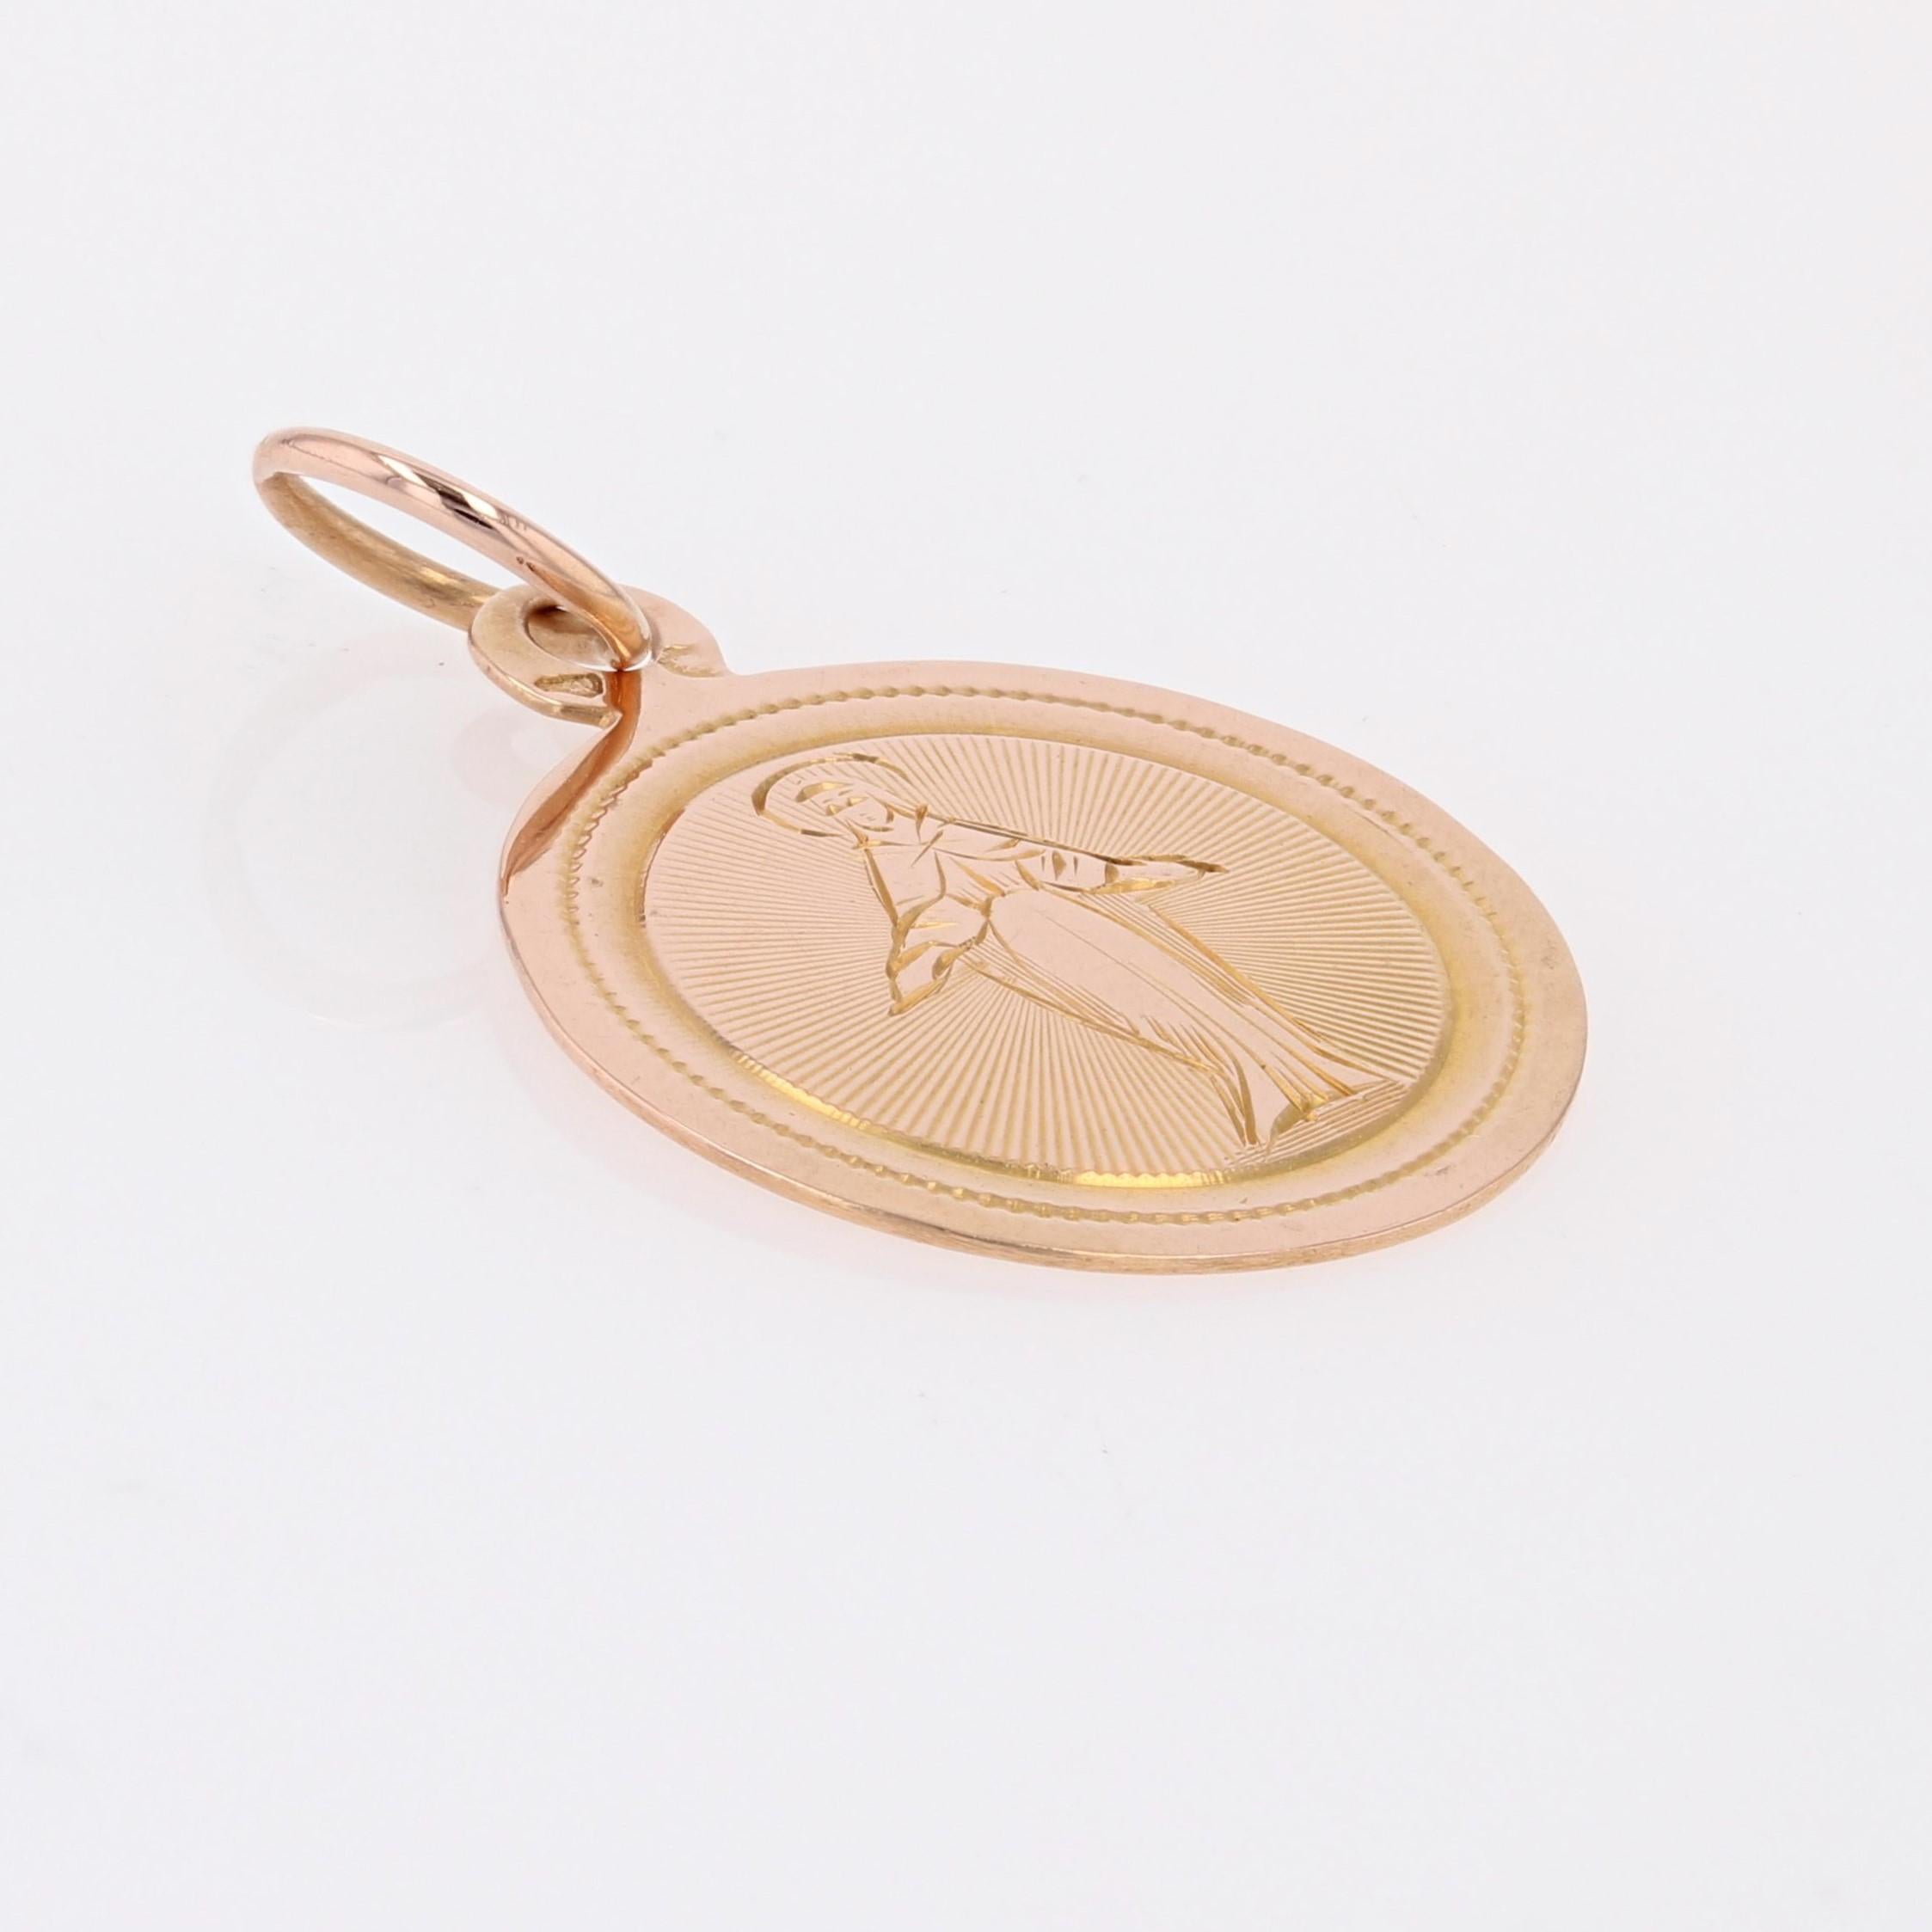 Medal in 18 karat rose gold, horse head hallmark.
This antique round- shape medal is engraved of the Virgin Mary haloed holding the open arms and encircled by a chiseled decoration. The back of this antique medal is engraved with initals.
Pendant